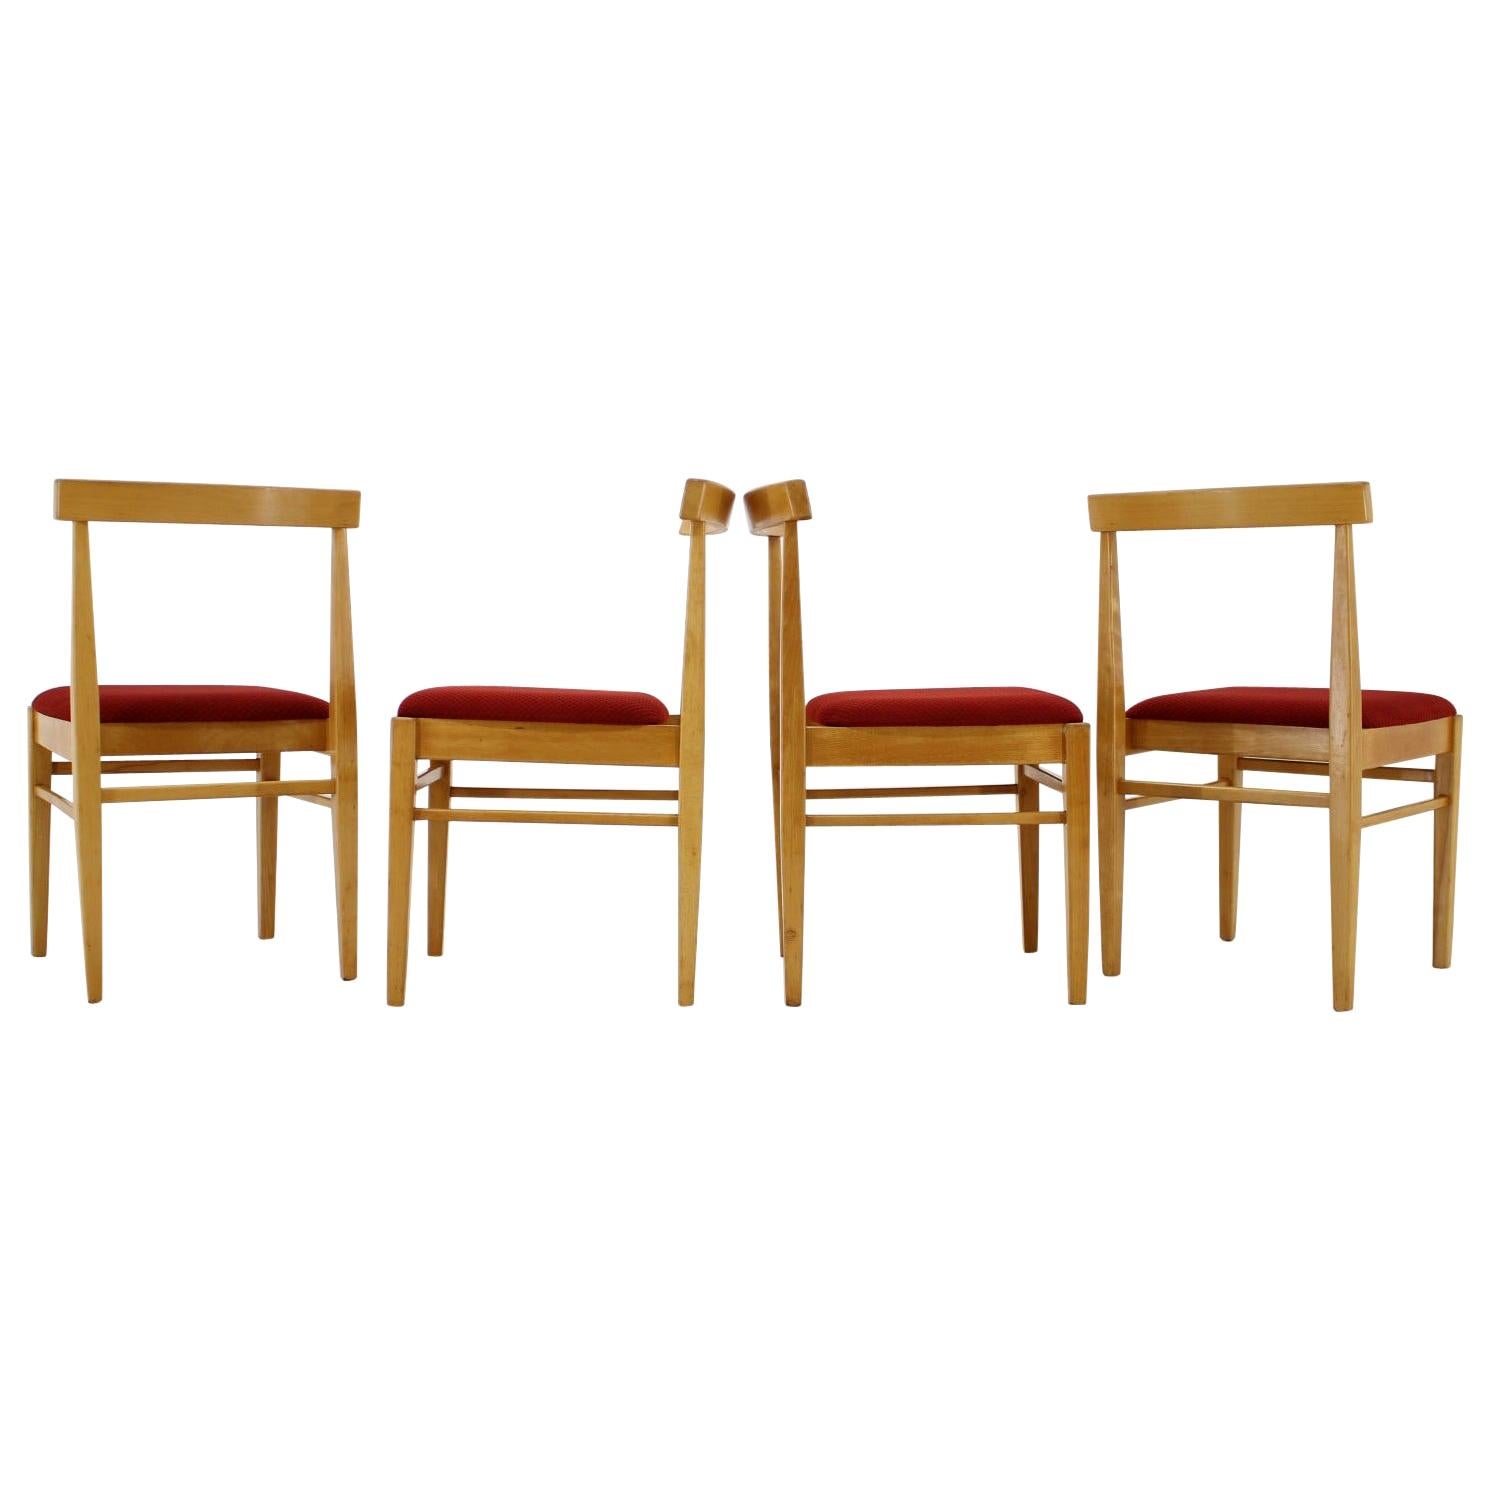 Set of Four Dining Chairs, Thon, 1970s